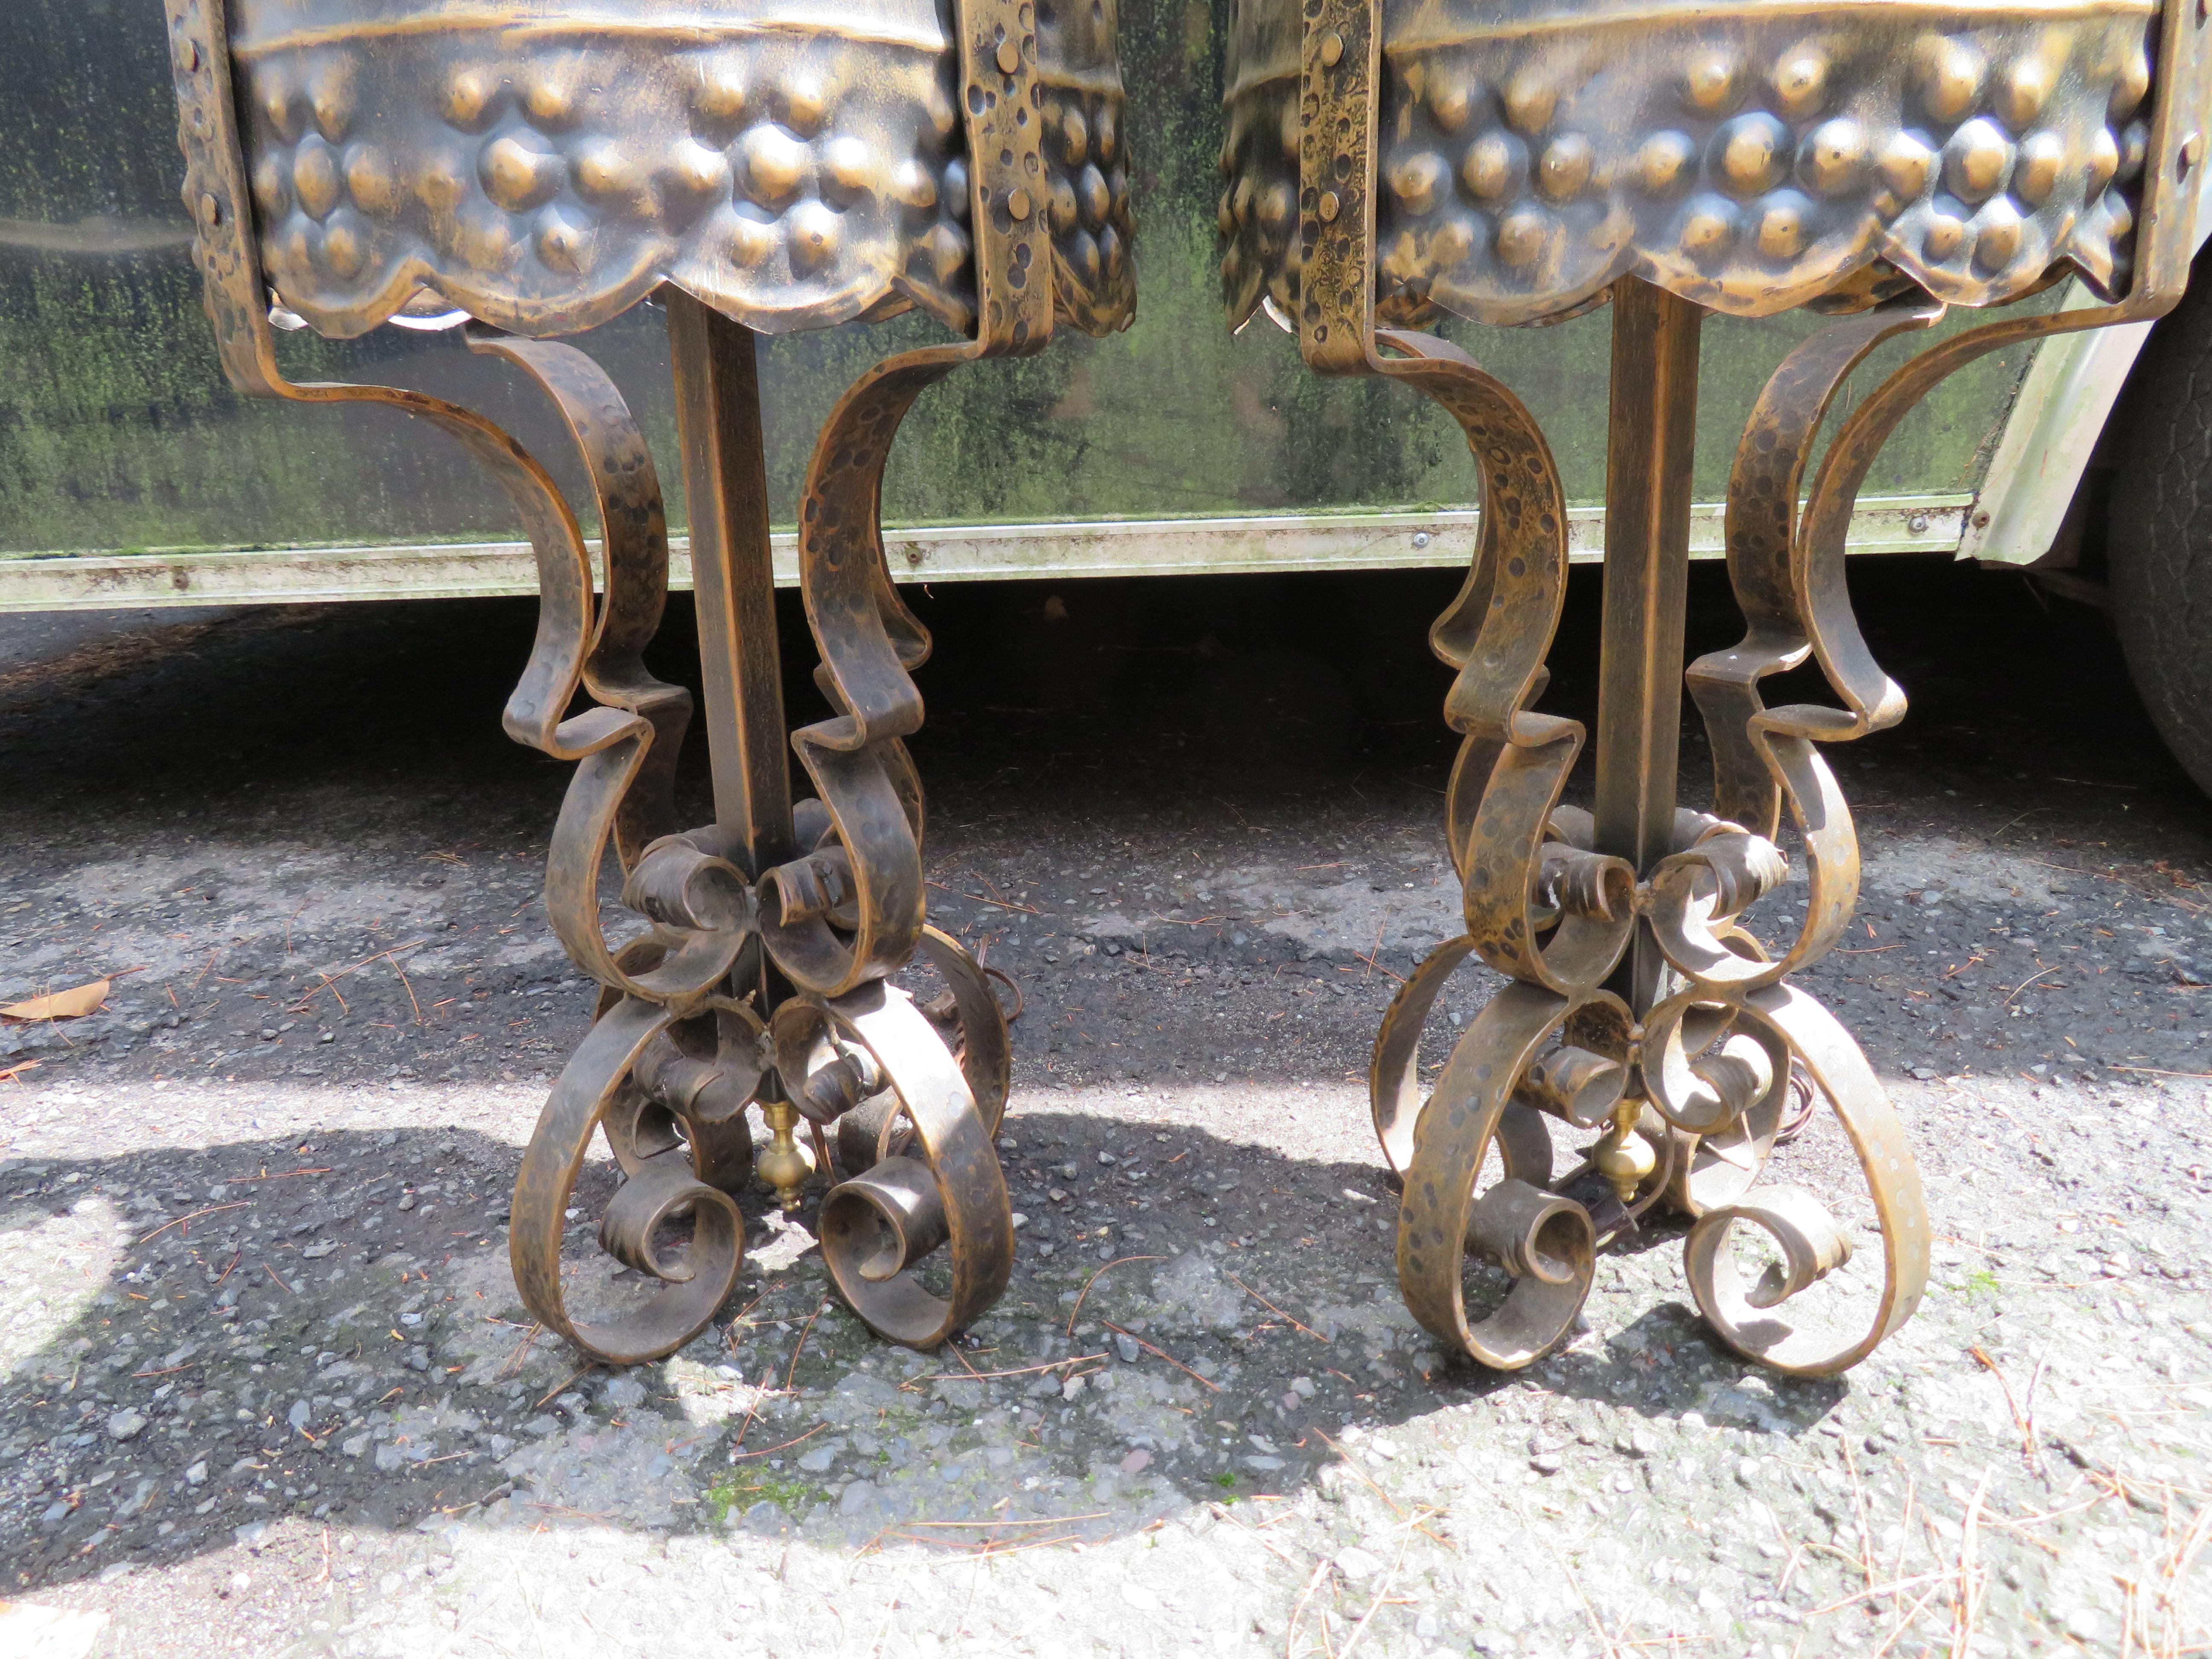 Monumental pair of Tudor Gothic Revival scroll lamps with attached hammered metal shade. These huge lamps are amazing in person and make a huge statement. They measure 32.5